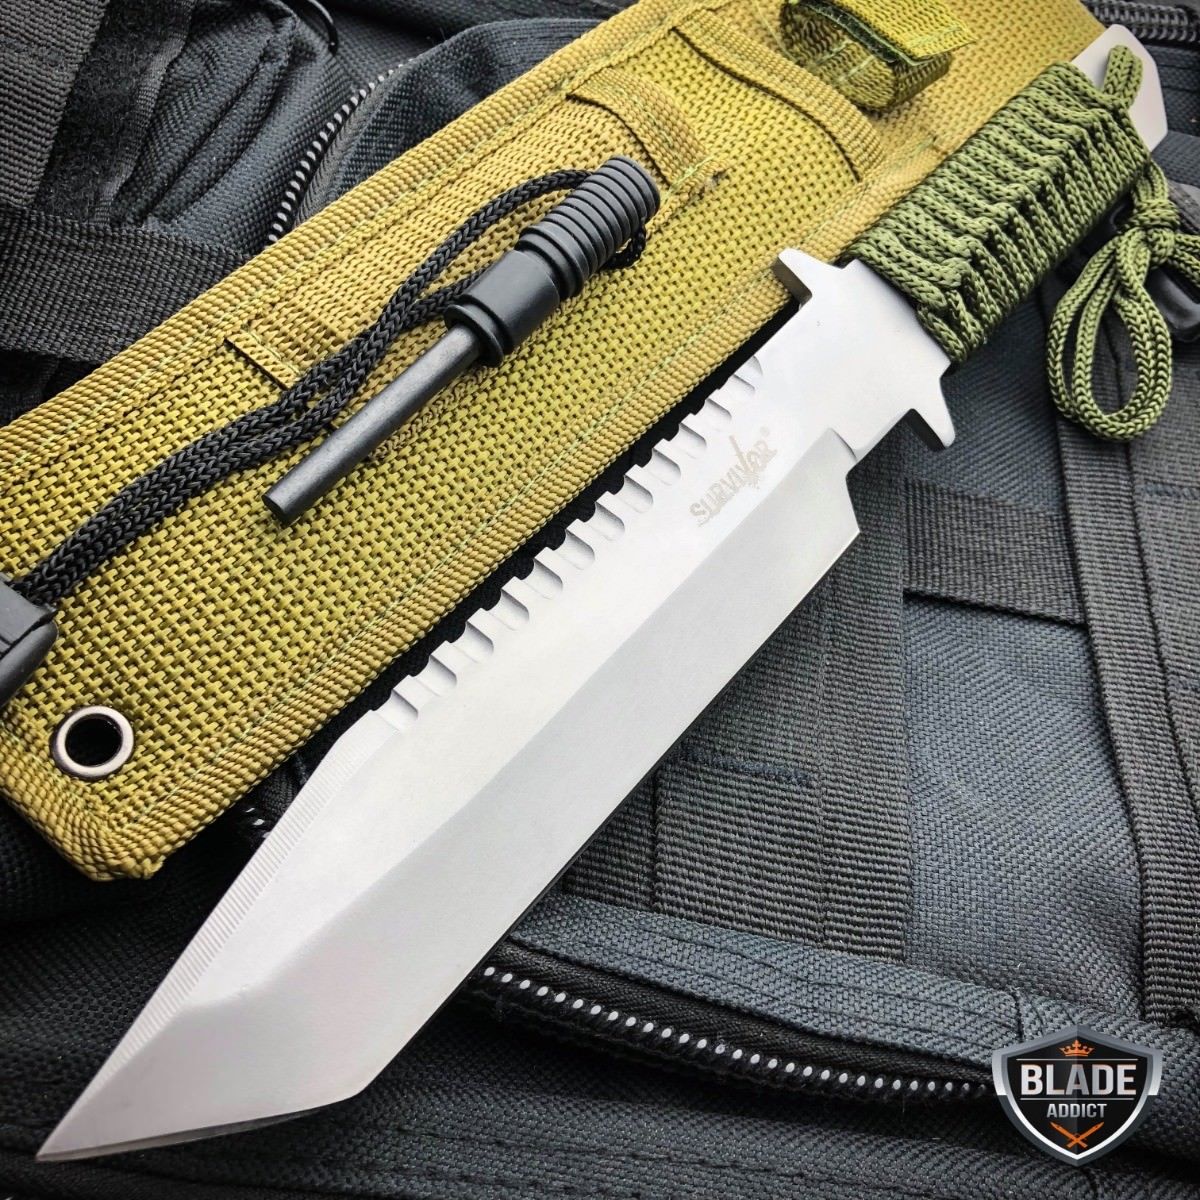 11" Military Hunting Tactical FIXED BLADE Knife Survival Bowie + Firestarter SET